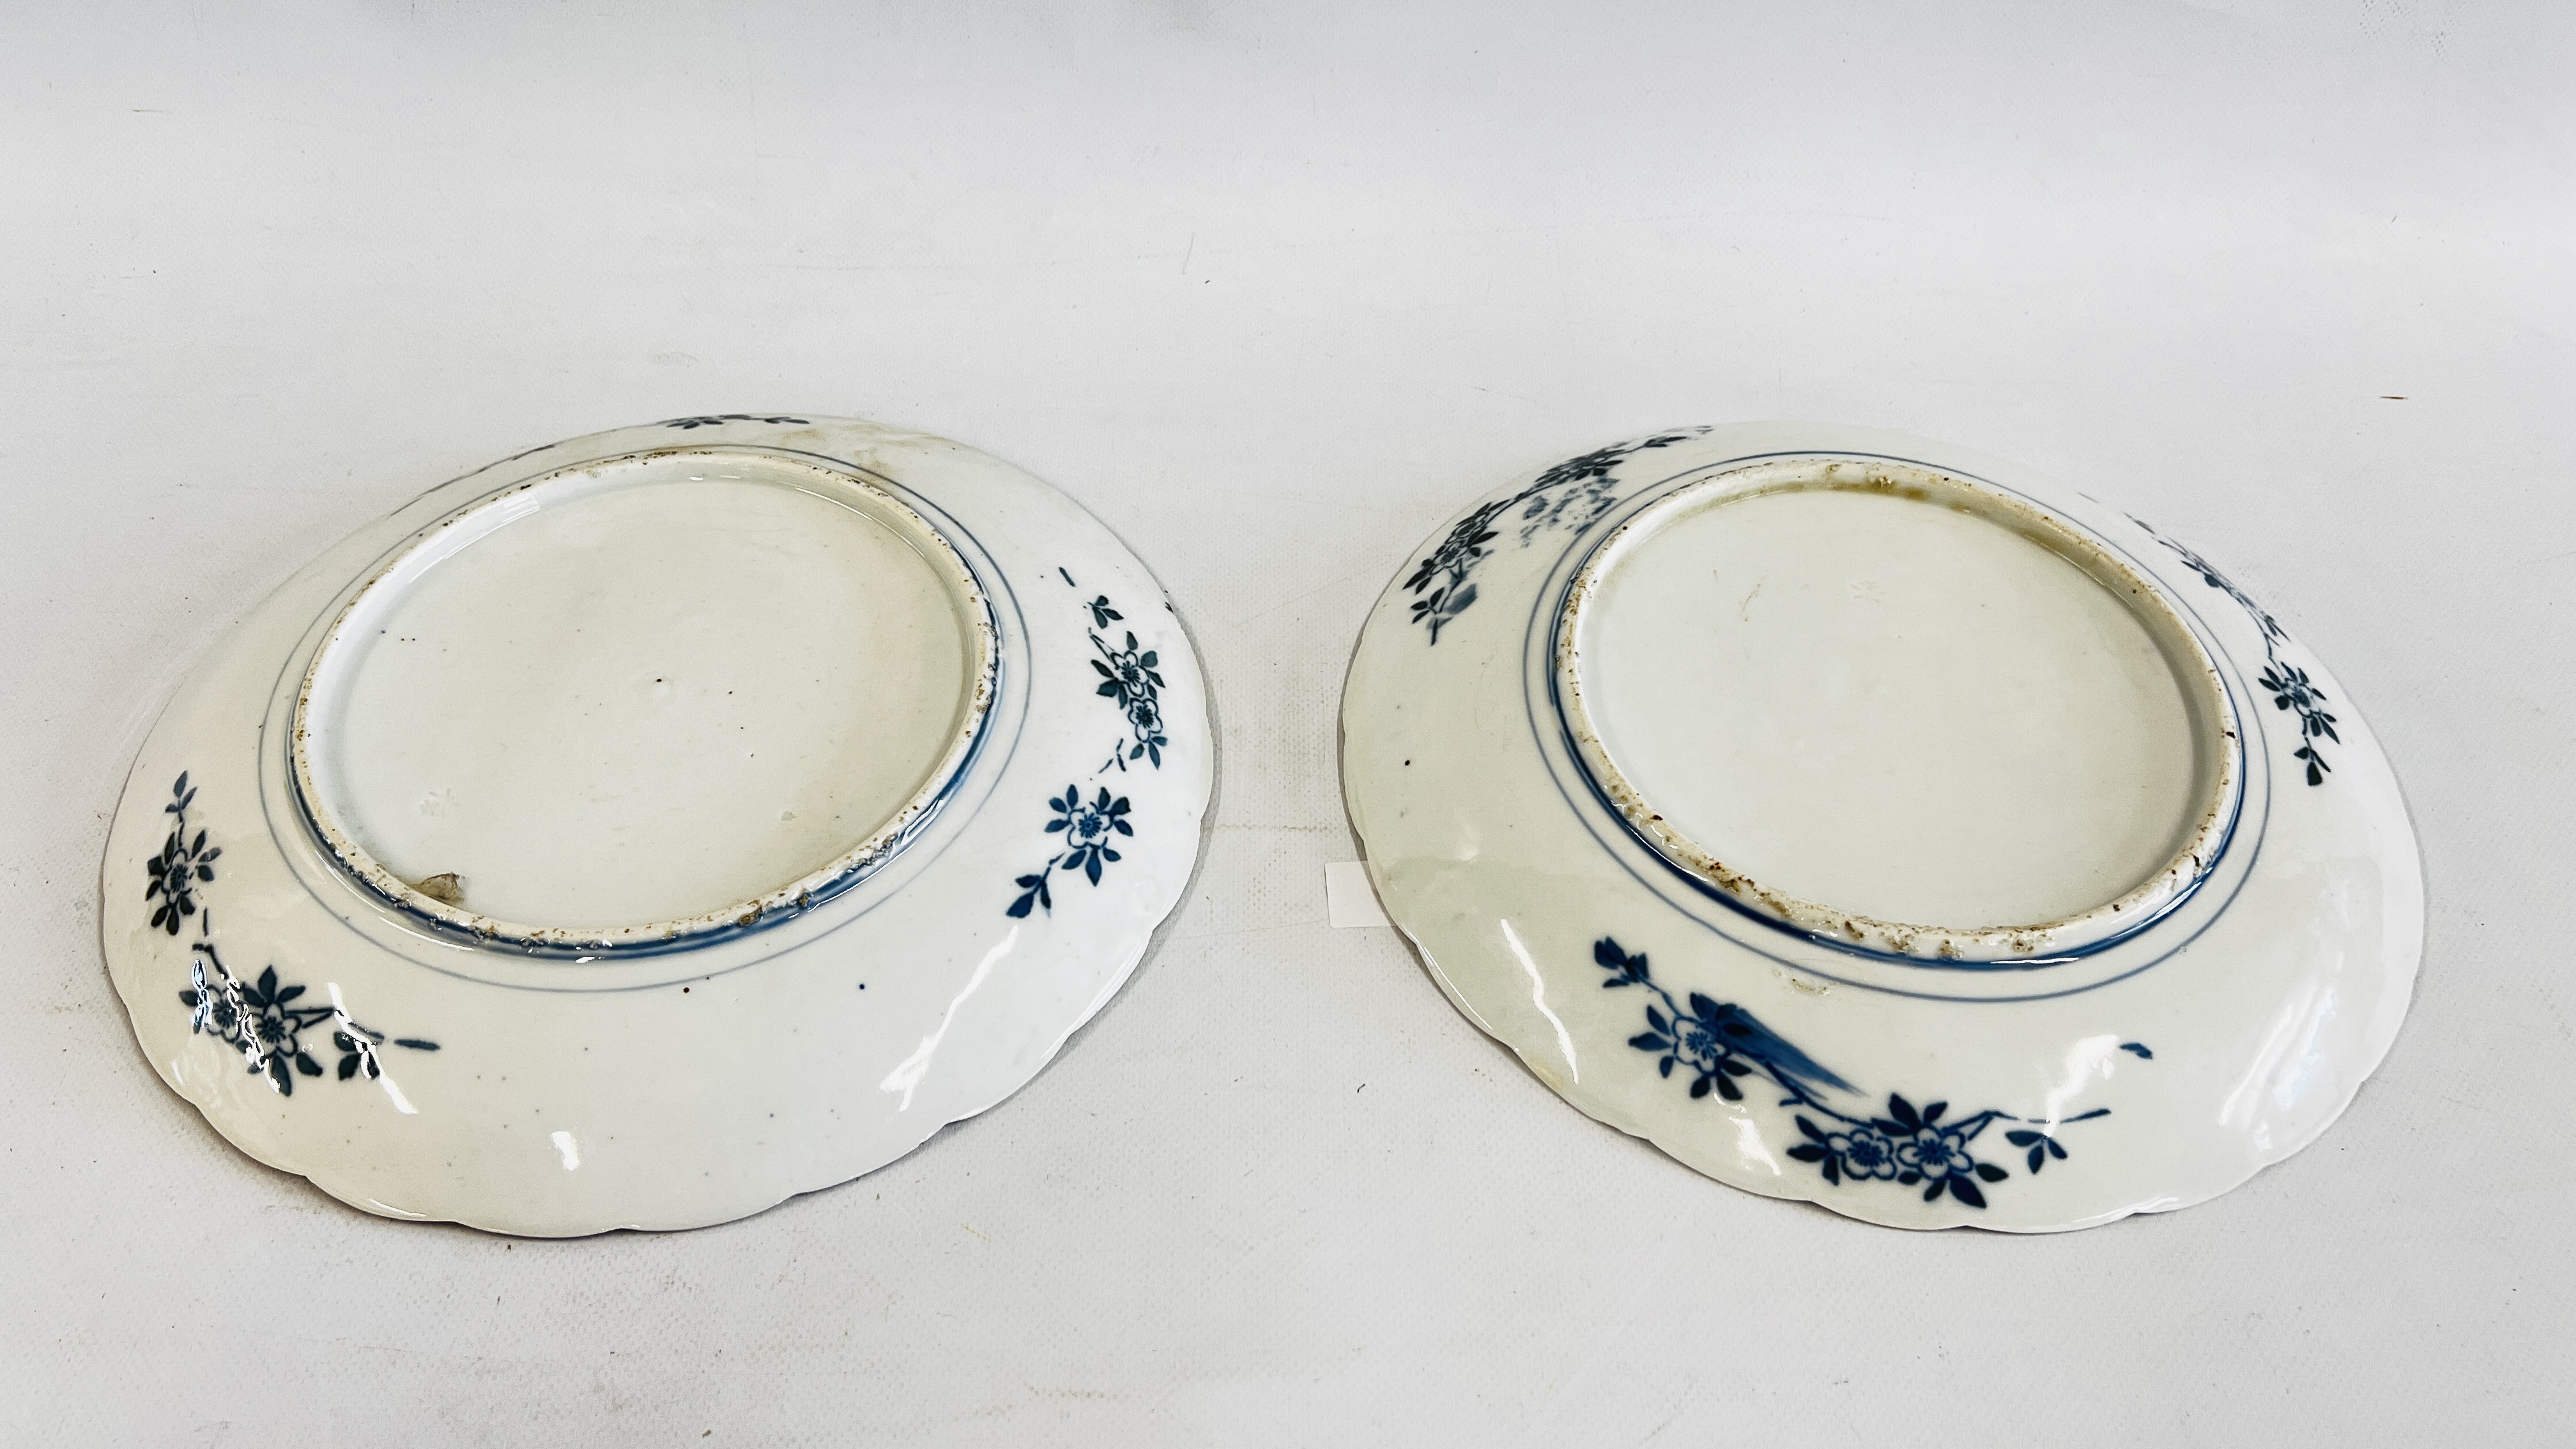 A PAIR OF VINTAGE IMARI PATTERN PLATES - DIAM 28.5CM (RIM CHIP & HAIRLINE CRACK TO ONE EXAMPLE). - Image 6 of 6